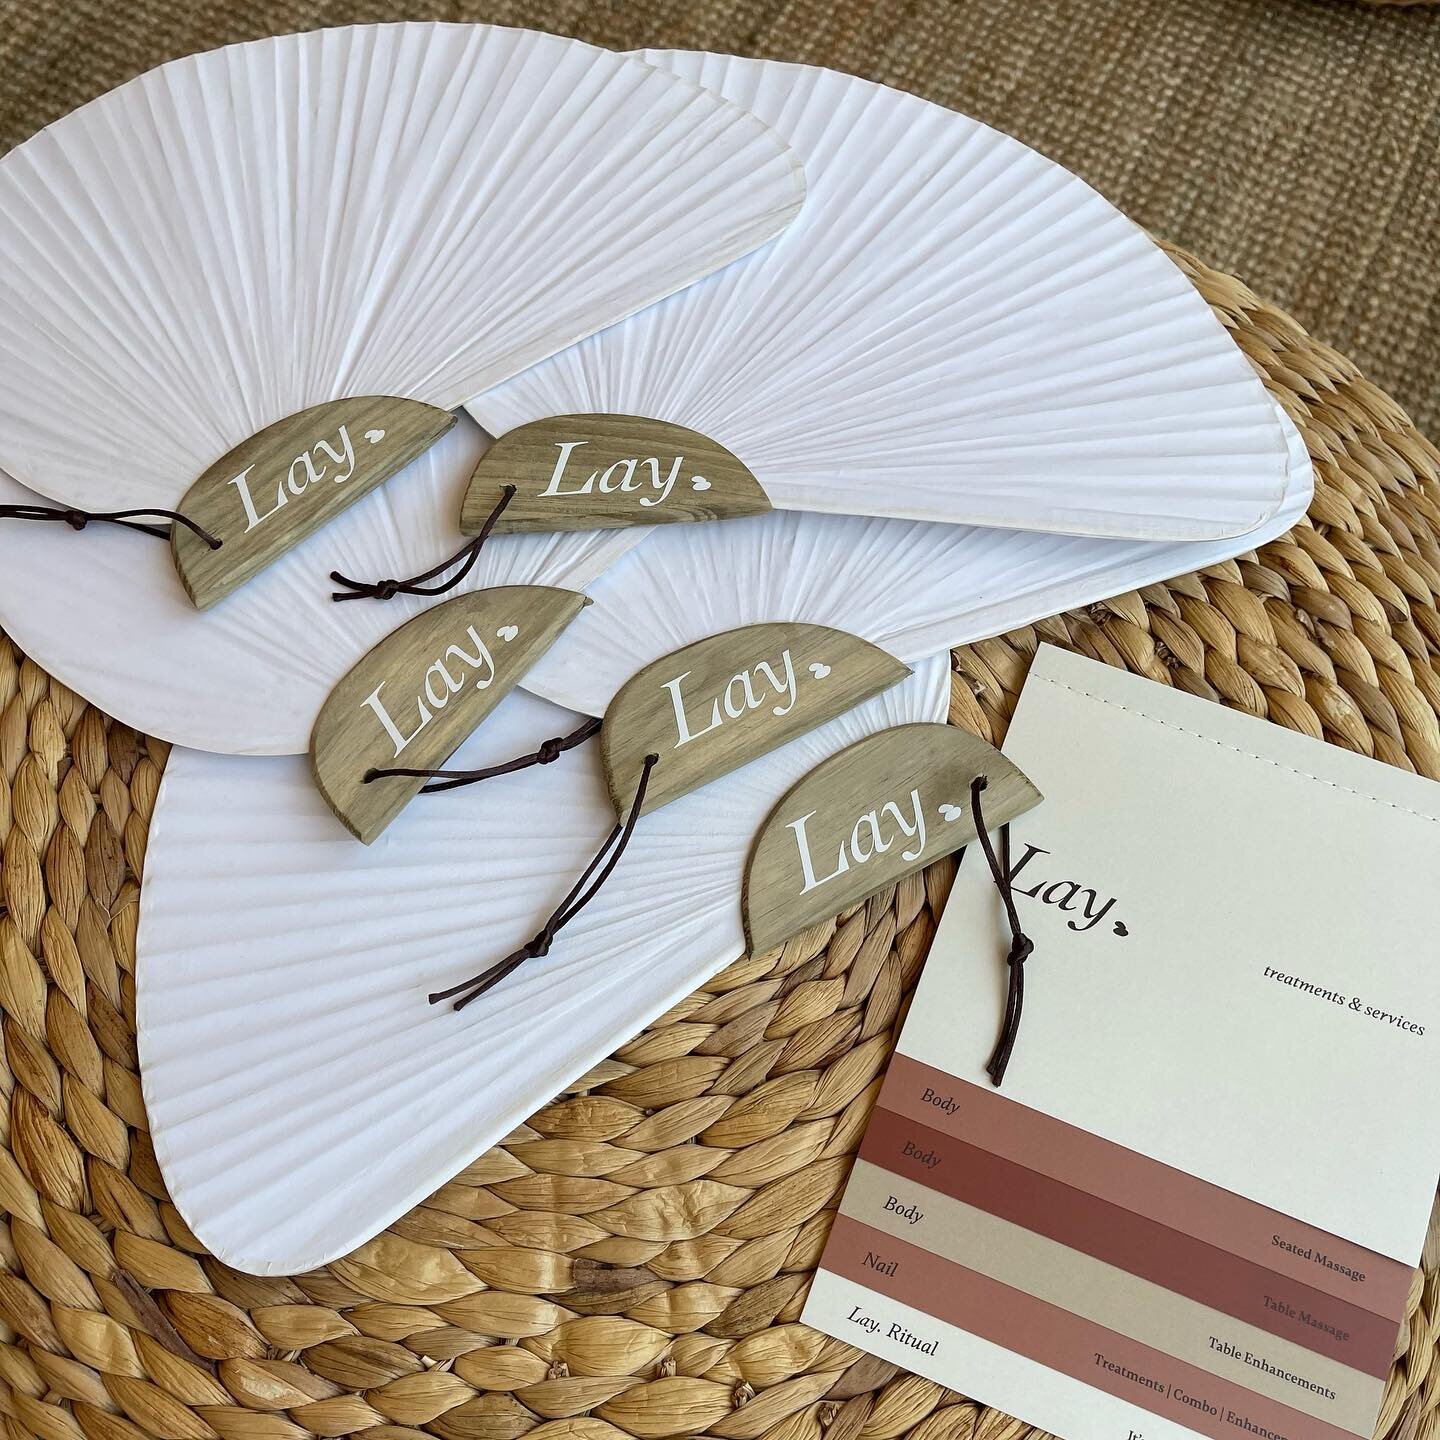 TGIF - wind down your week with a visit to Lay. and get a massage &amp; mani-pedi to start your weekend right.

PS. First 50 customers get a custom Lay. hand- fan after their treatments. 

#layretreat #getlayd #layaway #laywithus